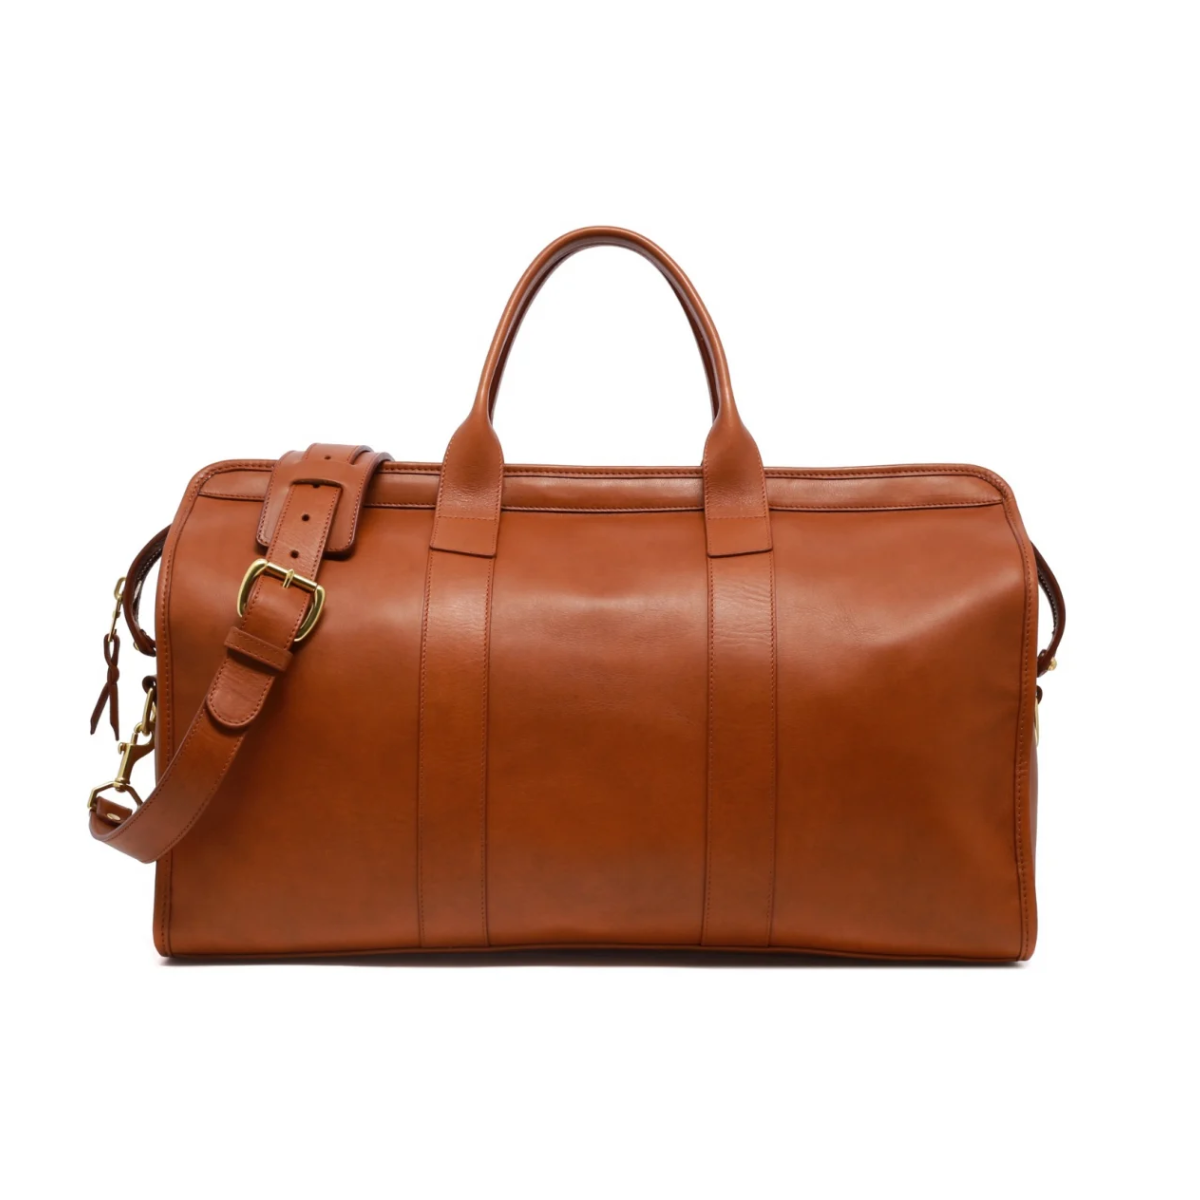 17. Timeless Elegance: Handcrafted Leather Travel Duffle Bag - The Perfect Anniversary Gift for Him